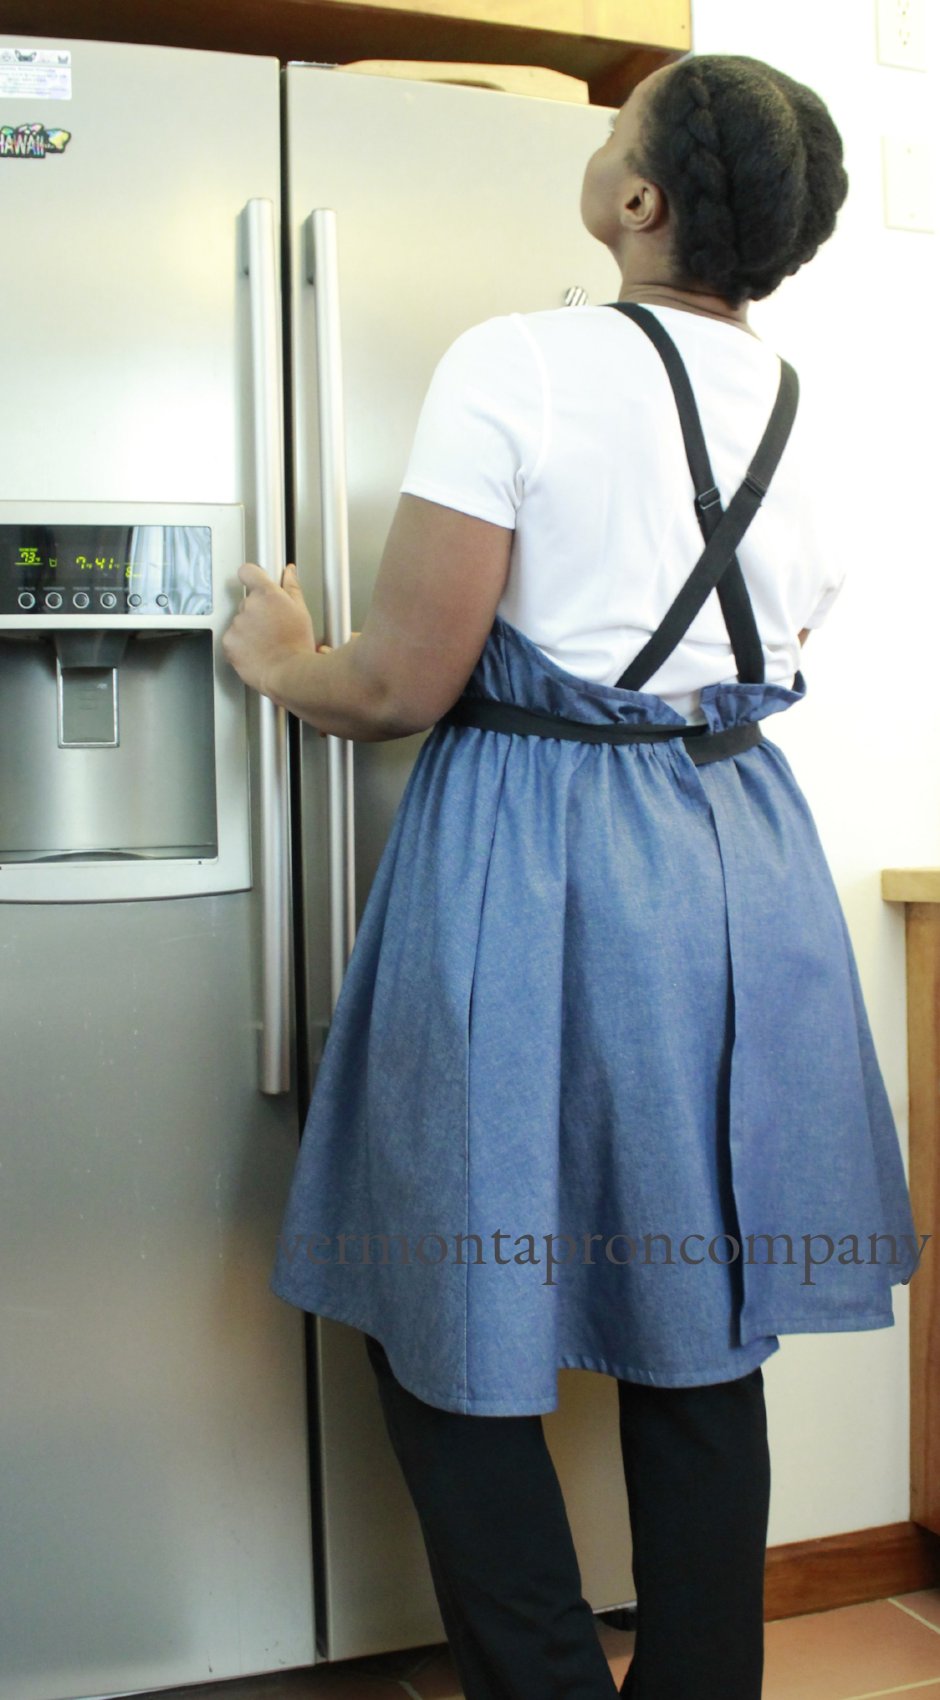 XS-5X A-Line Crossback Apron in Denim, back view